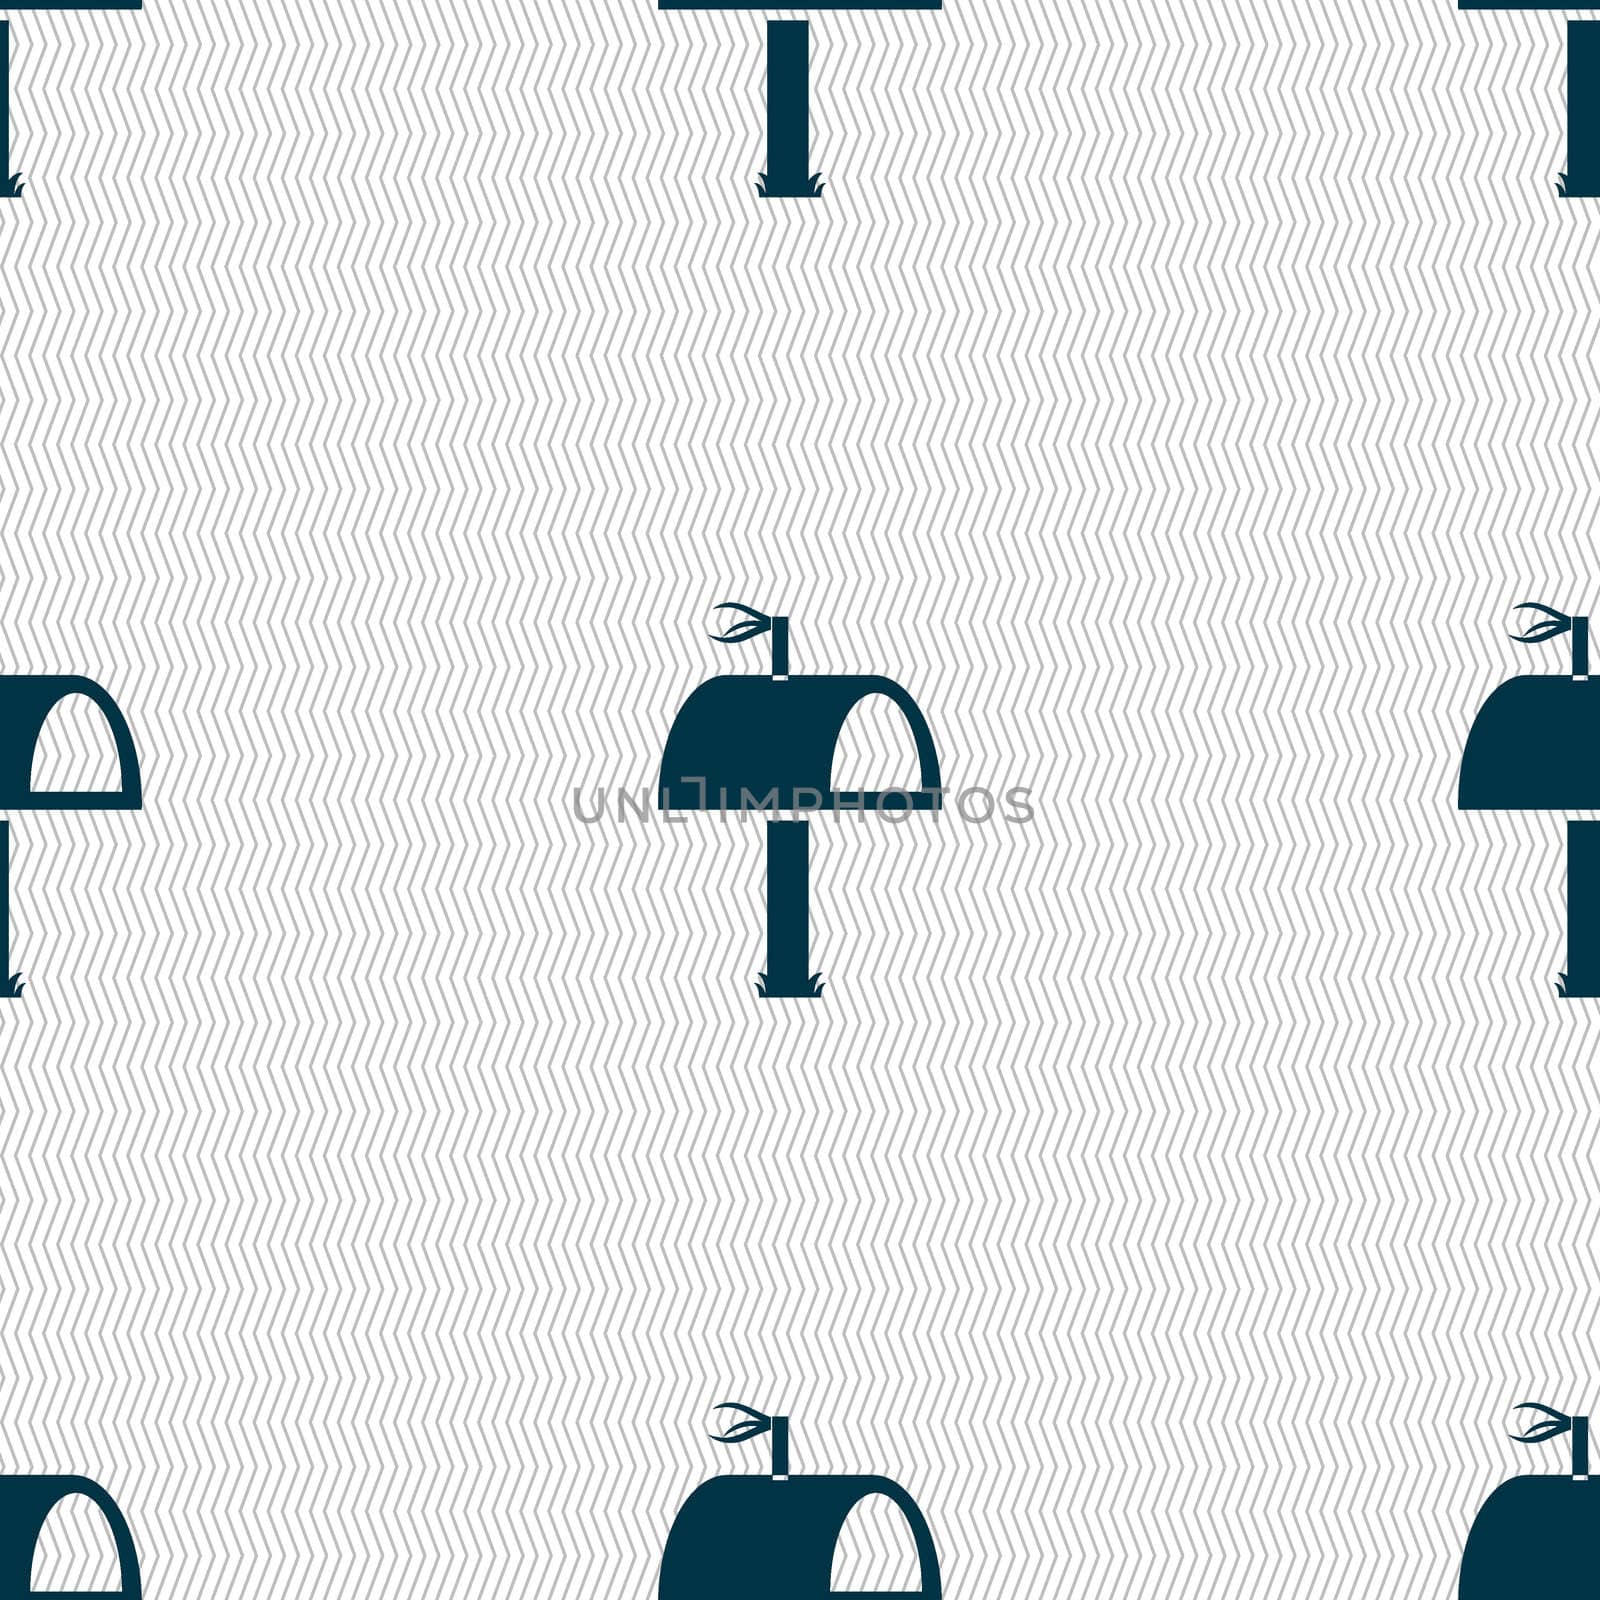 Mailbox icon sign. Seamless abstract background with geometric shapes. illustration